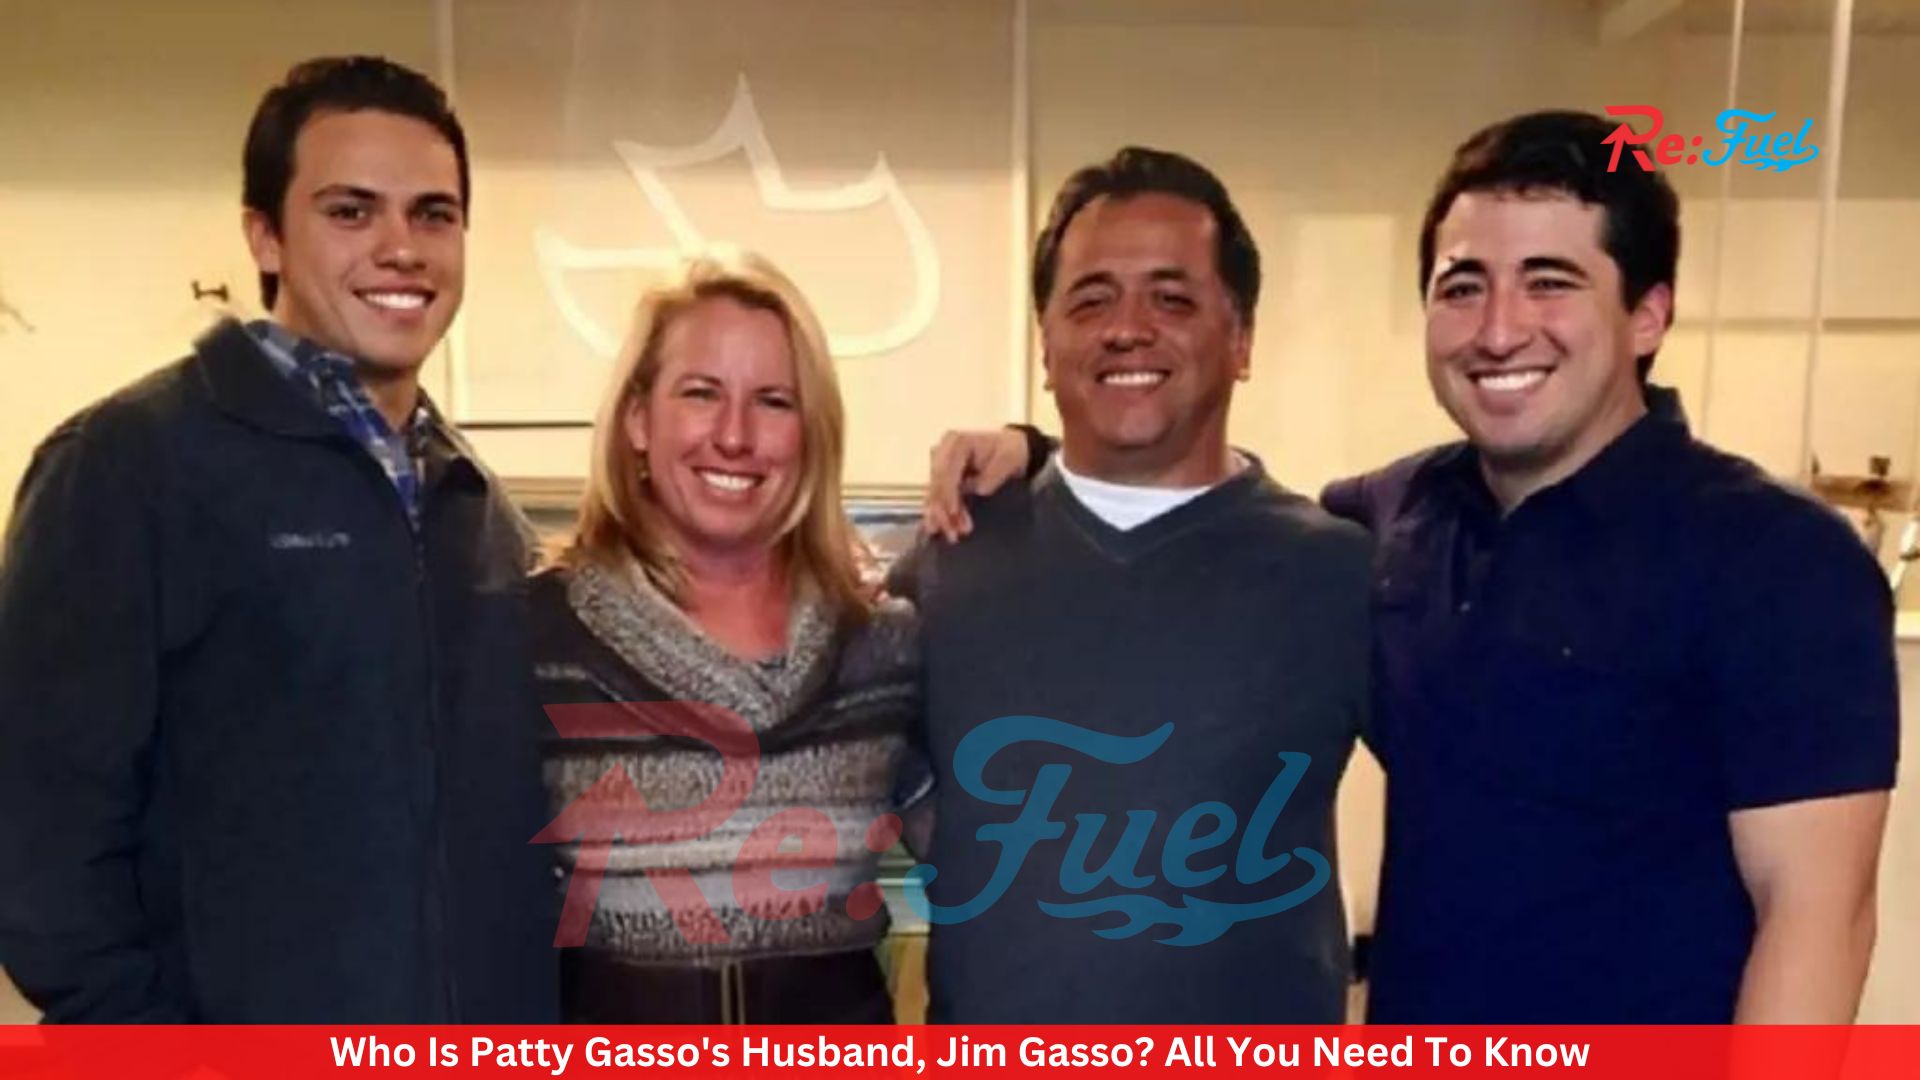 Who Is Patty Gasso's Husband, Jim Gasso? All You Need To Know